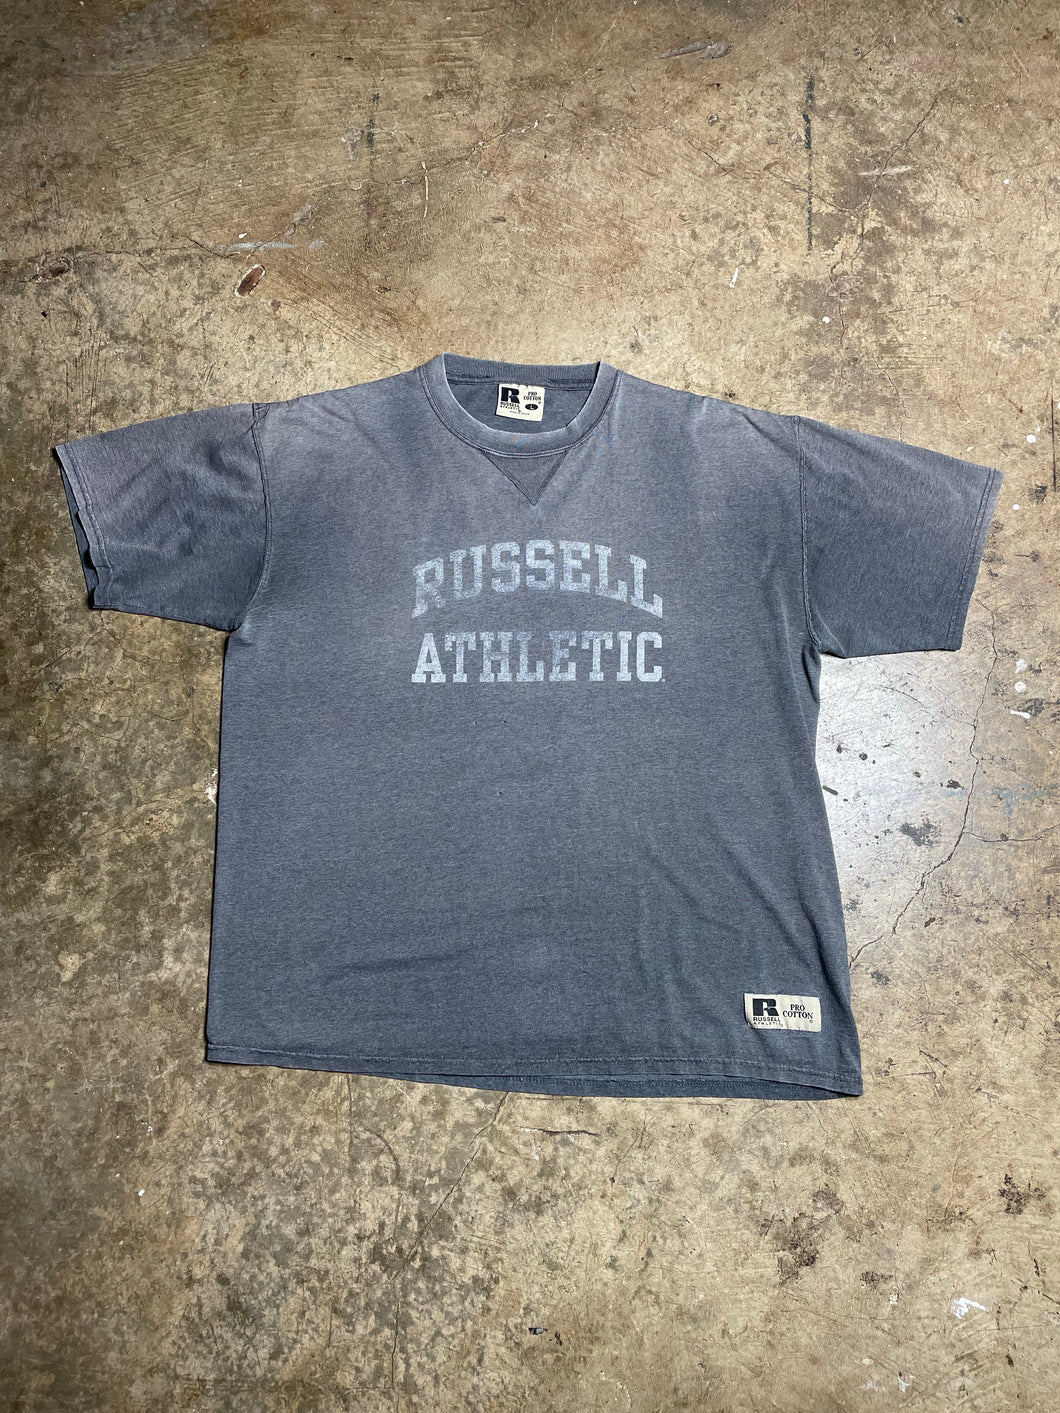 Early Y2K Gray Self Branded Russell Tee - XL